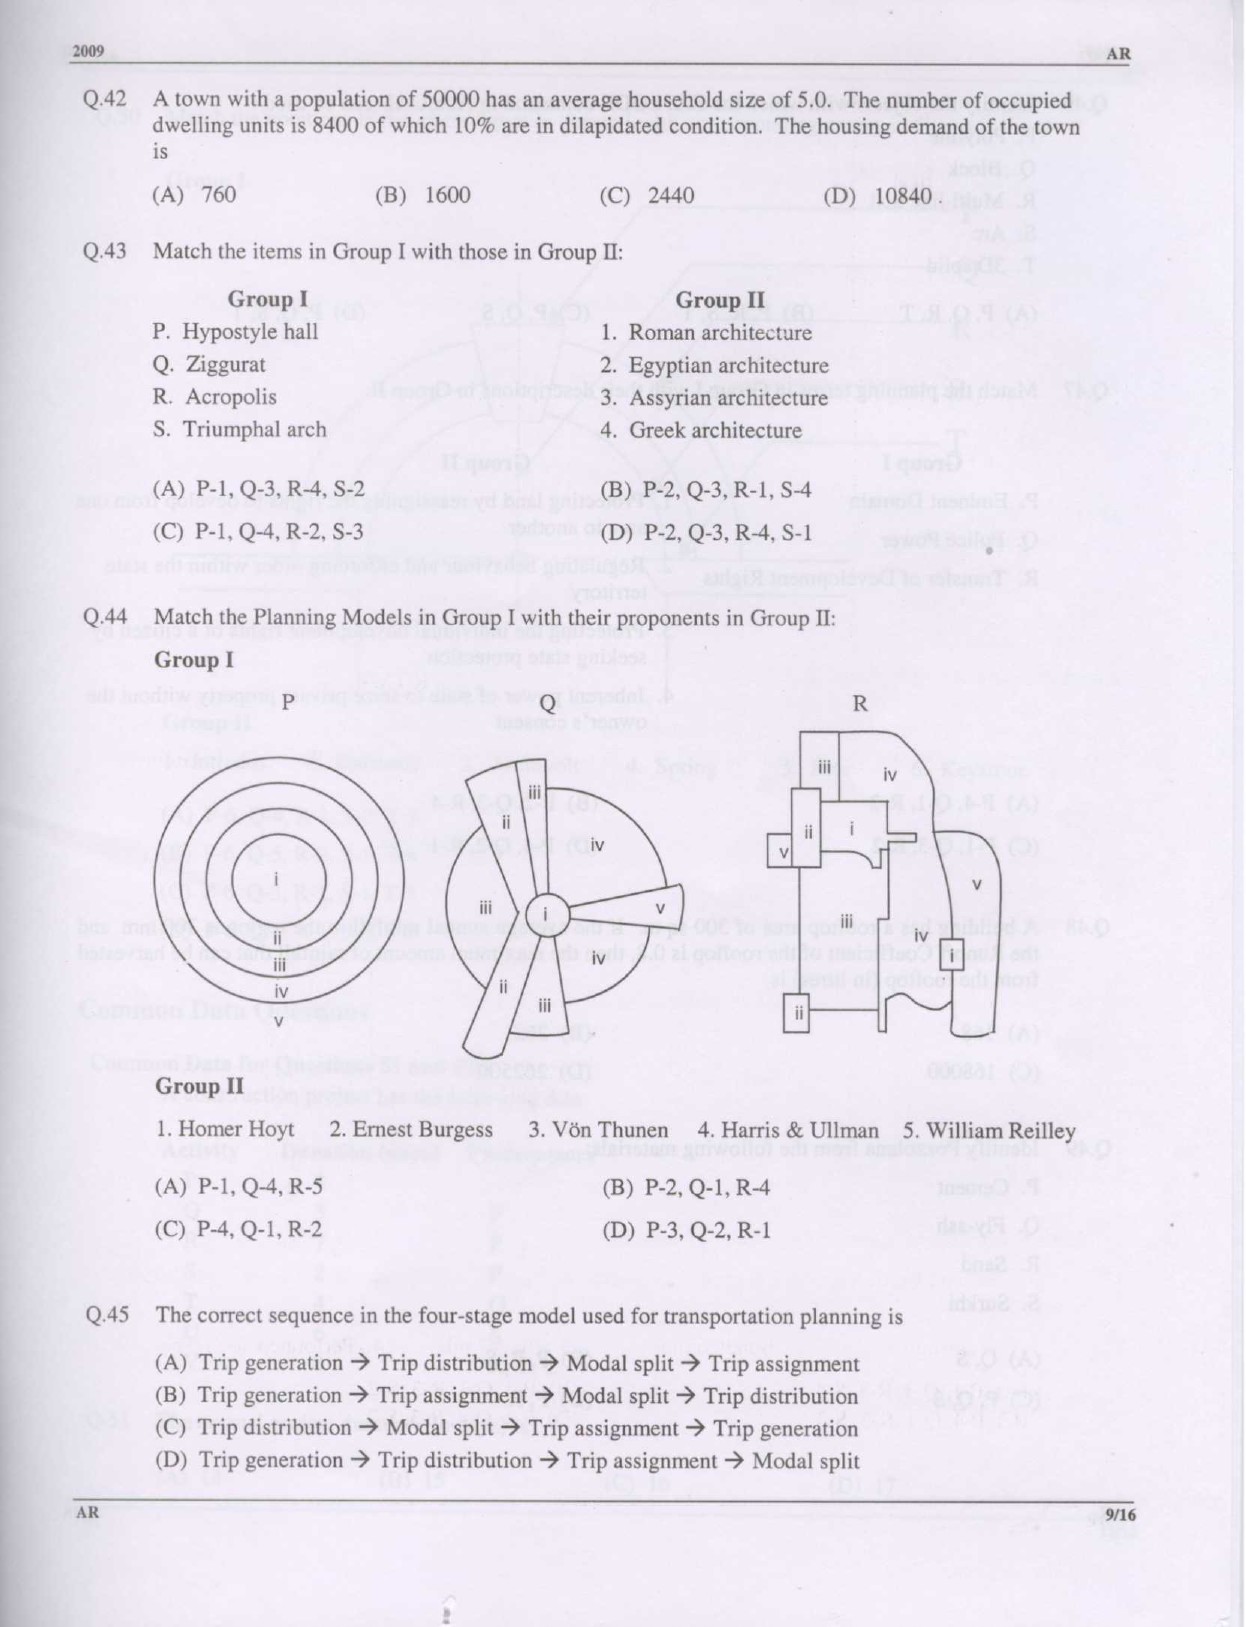 GATE Exam Question Paper 2009 Architecture and Planning 9